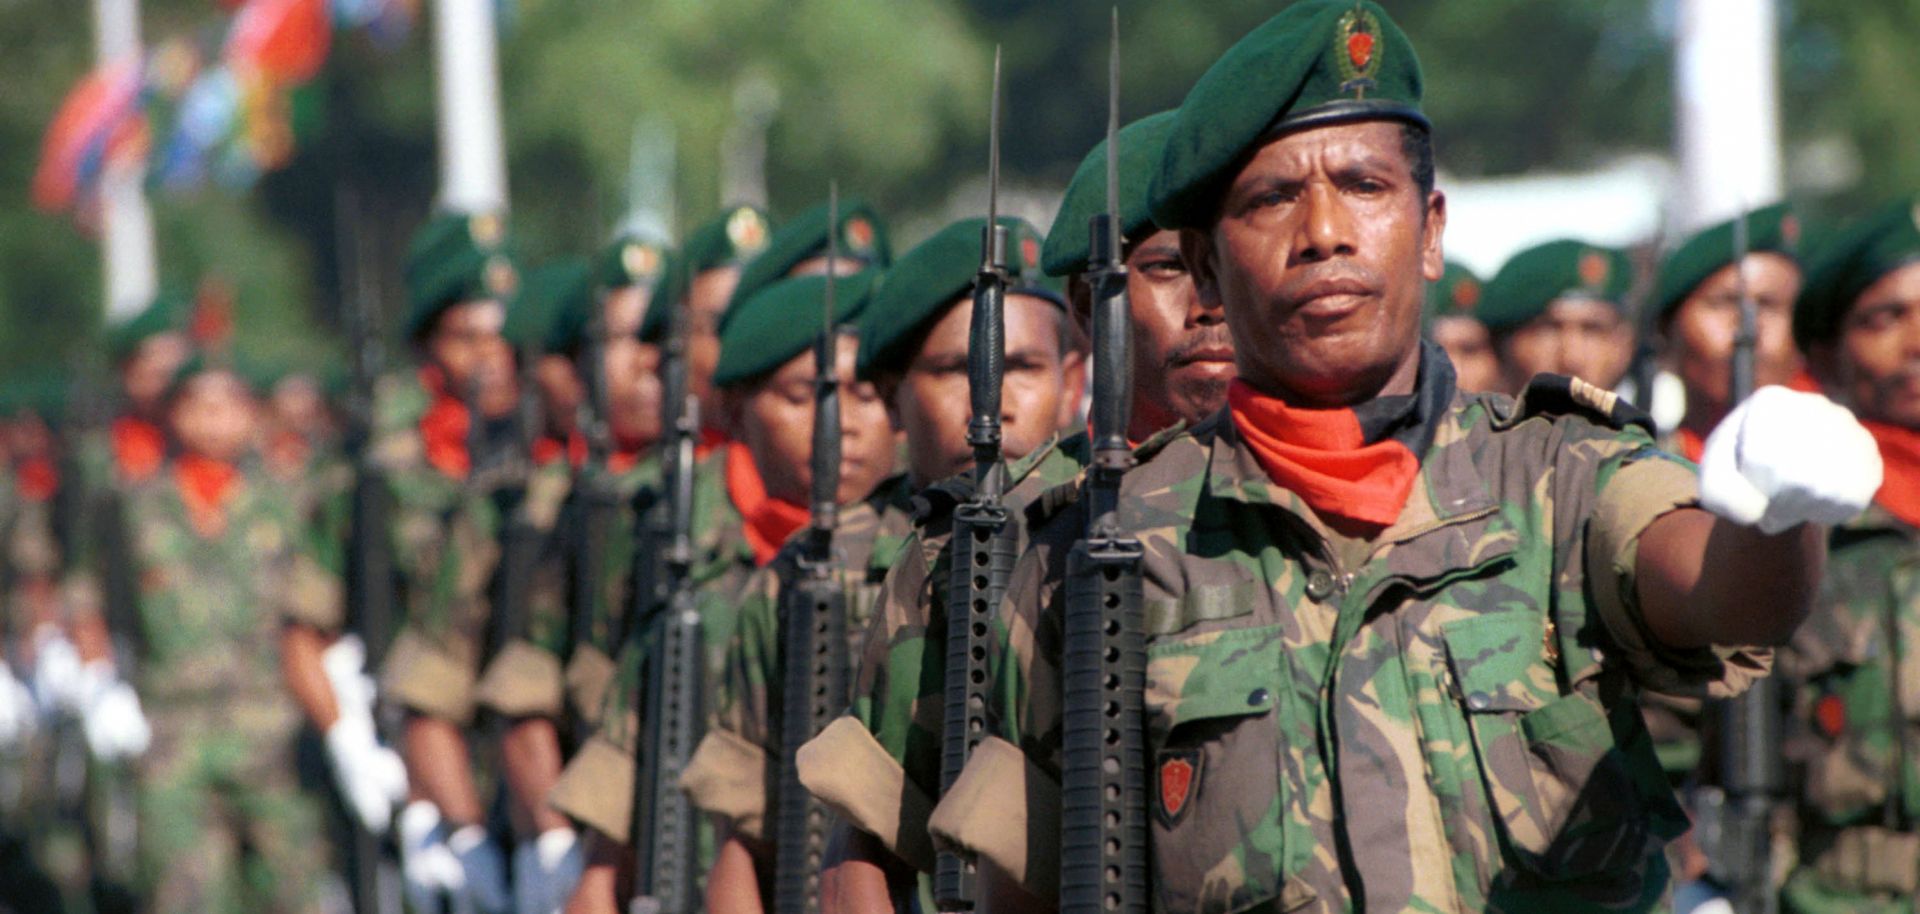 Members of the East Timorese Defense Force march in a parade during independence celebrations in Dili on May 20, 2002.